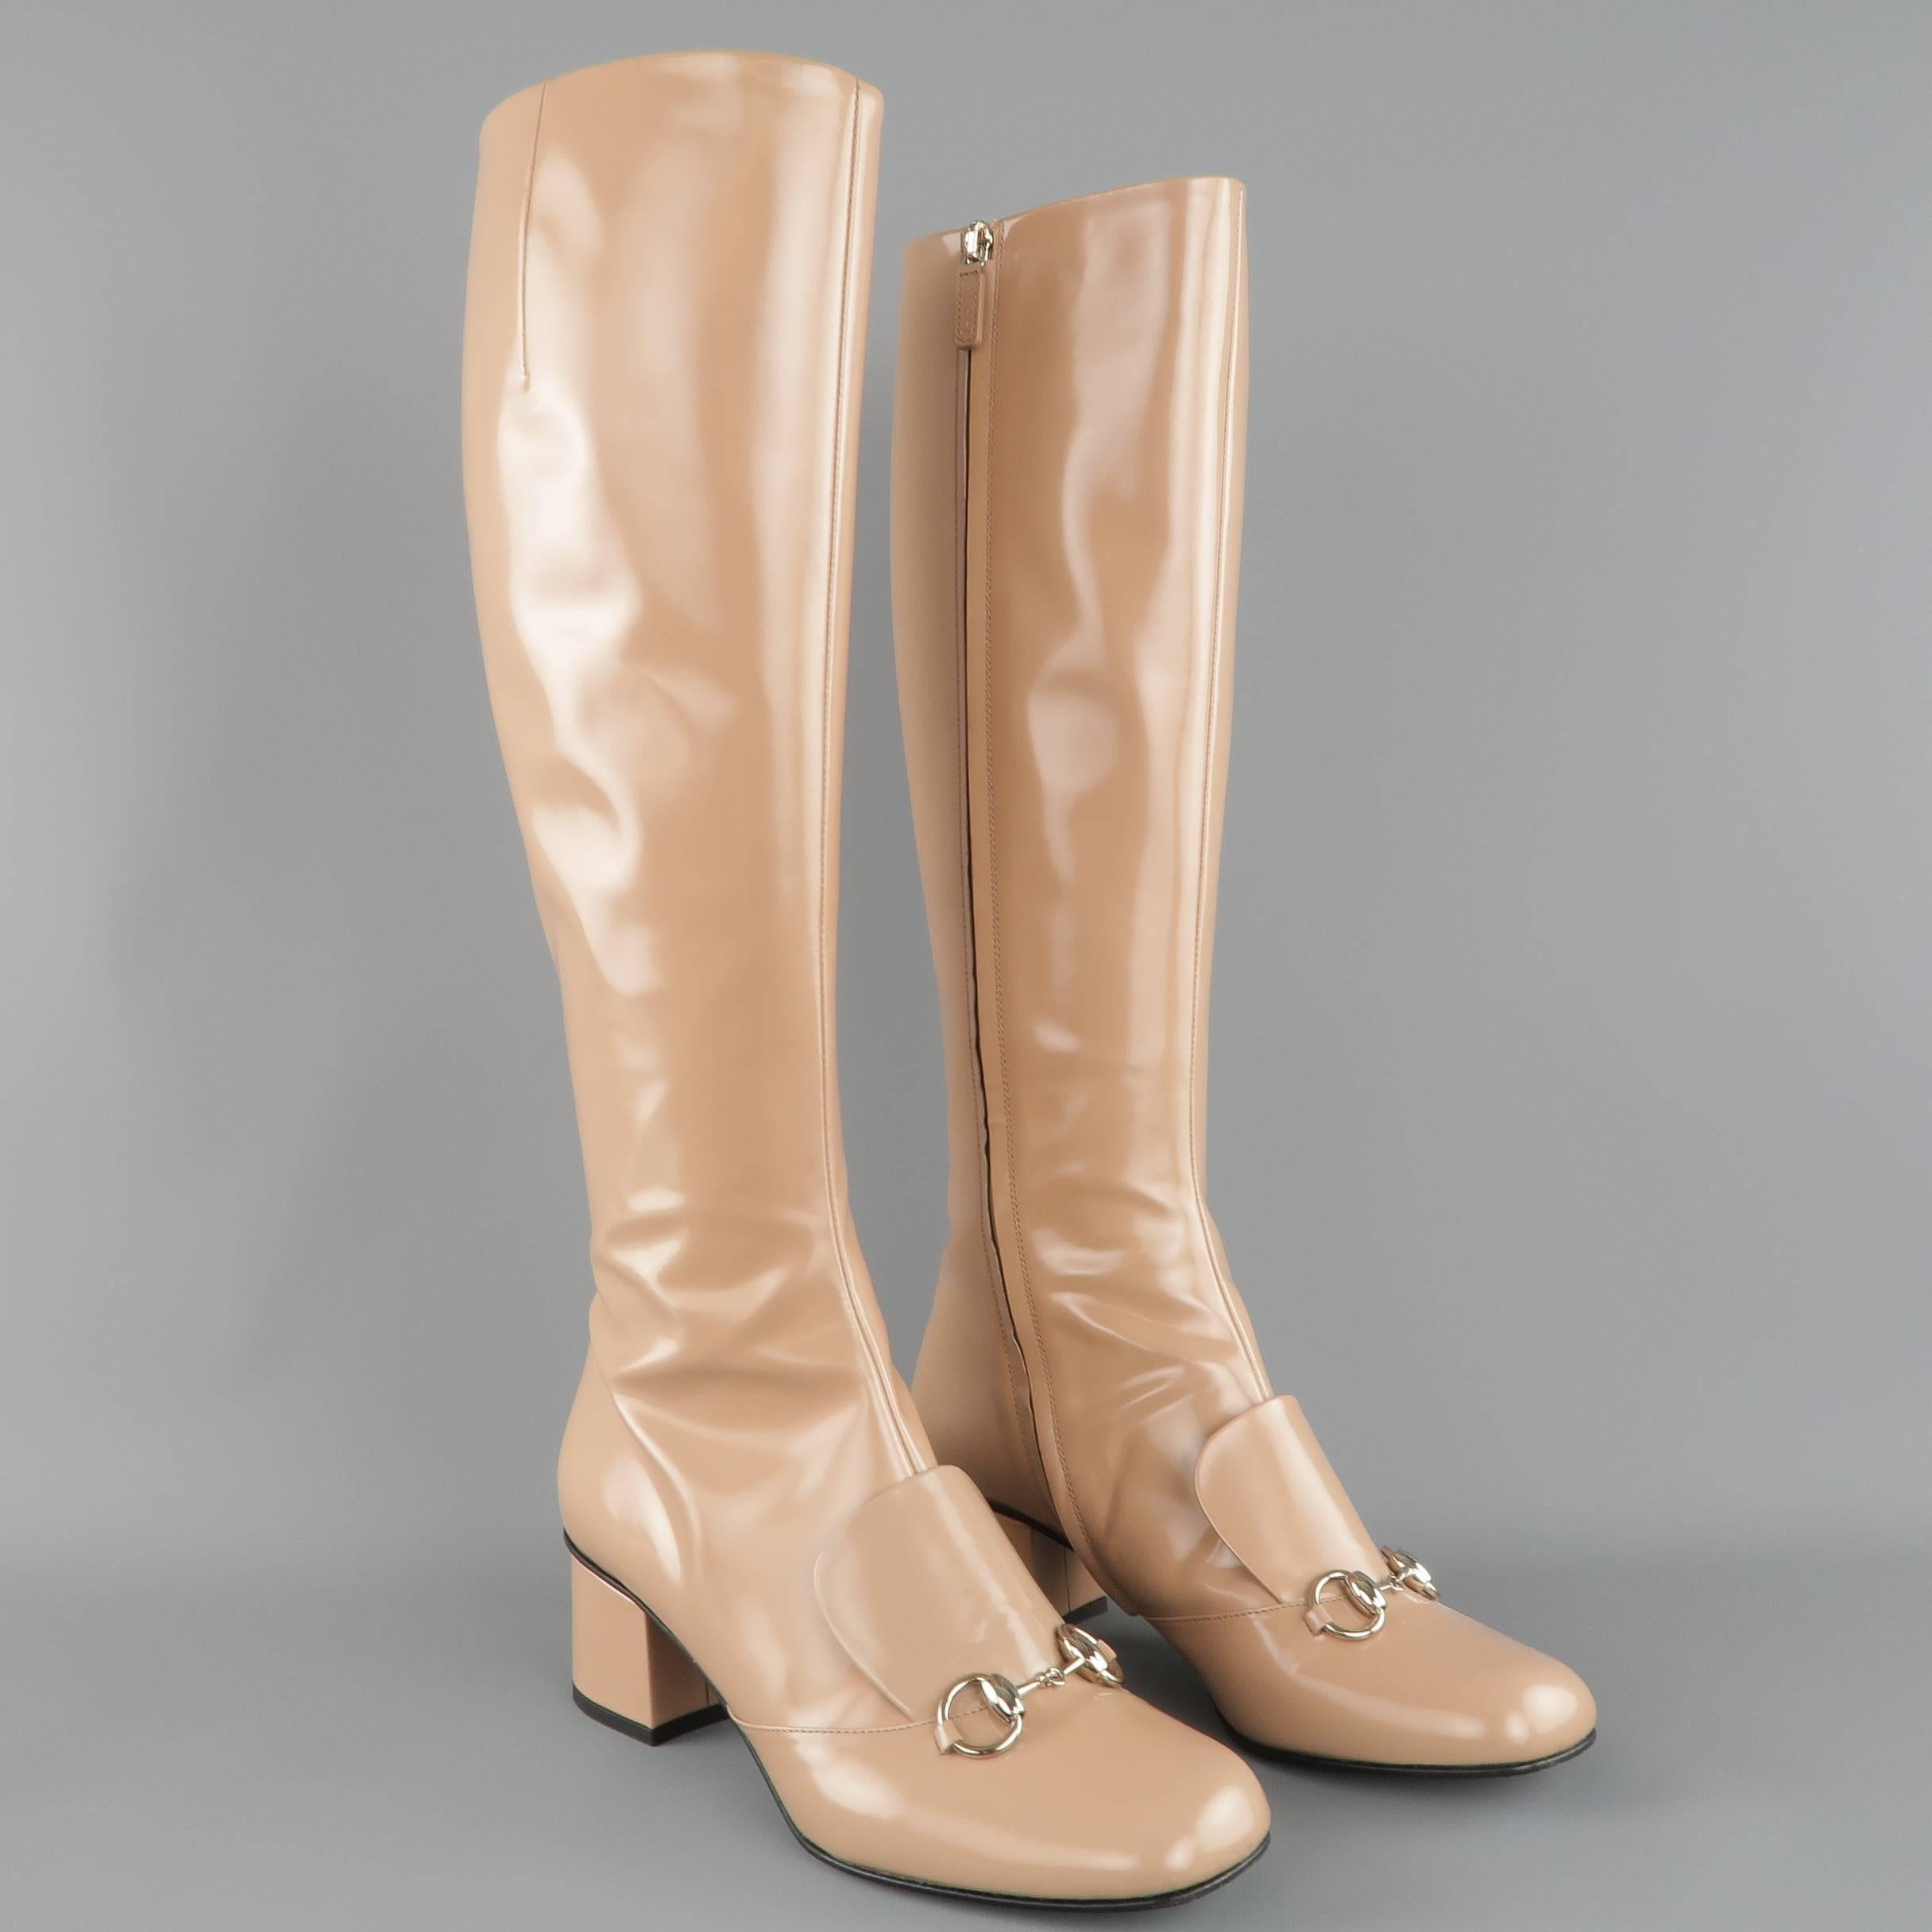 GUCCI "Lillian" knee high boots come in a tan glossy smooth leather and feature a round squared toe, silver tone horsebit hardware, mock loafer tongue, and covered chunky heel. Scuff on heel. As-Is. Made in Italy.
 
Good Pre-Owned